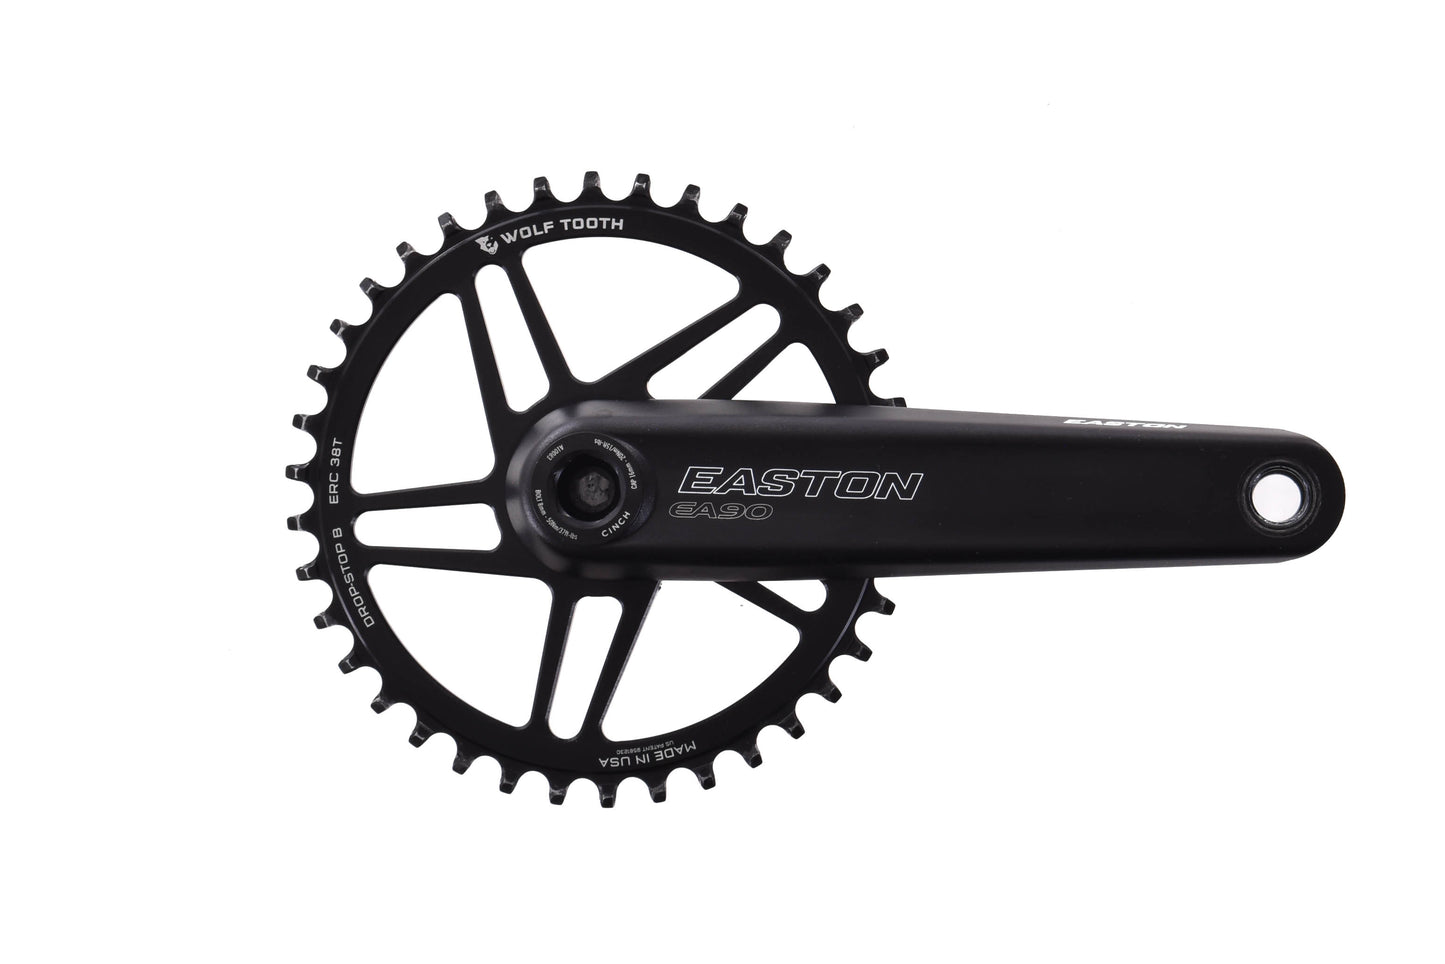 USED Easton EA90 170mm 1x CINCH Crankset w/ Wolftooth 38T Chainring Wheels MFG Angular Contact BB BSA